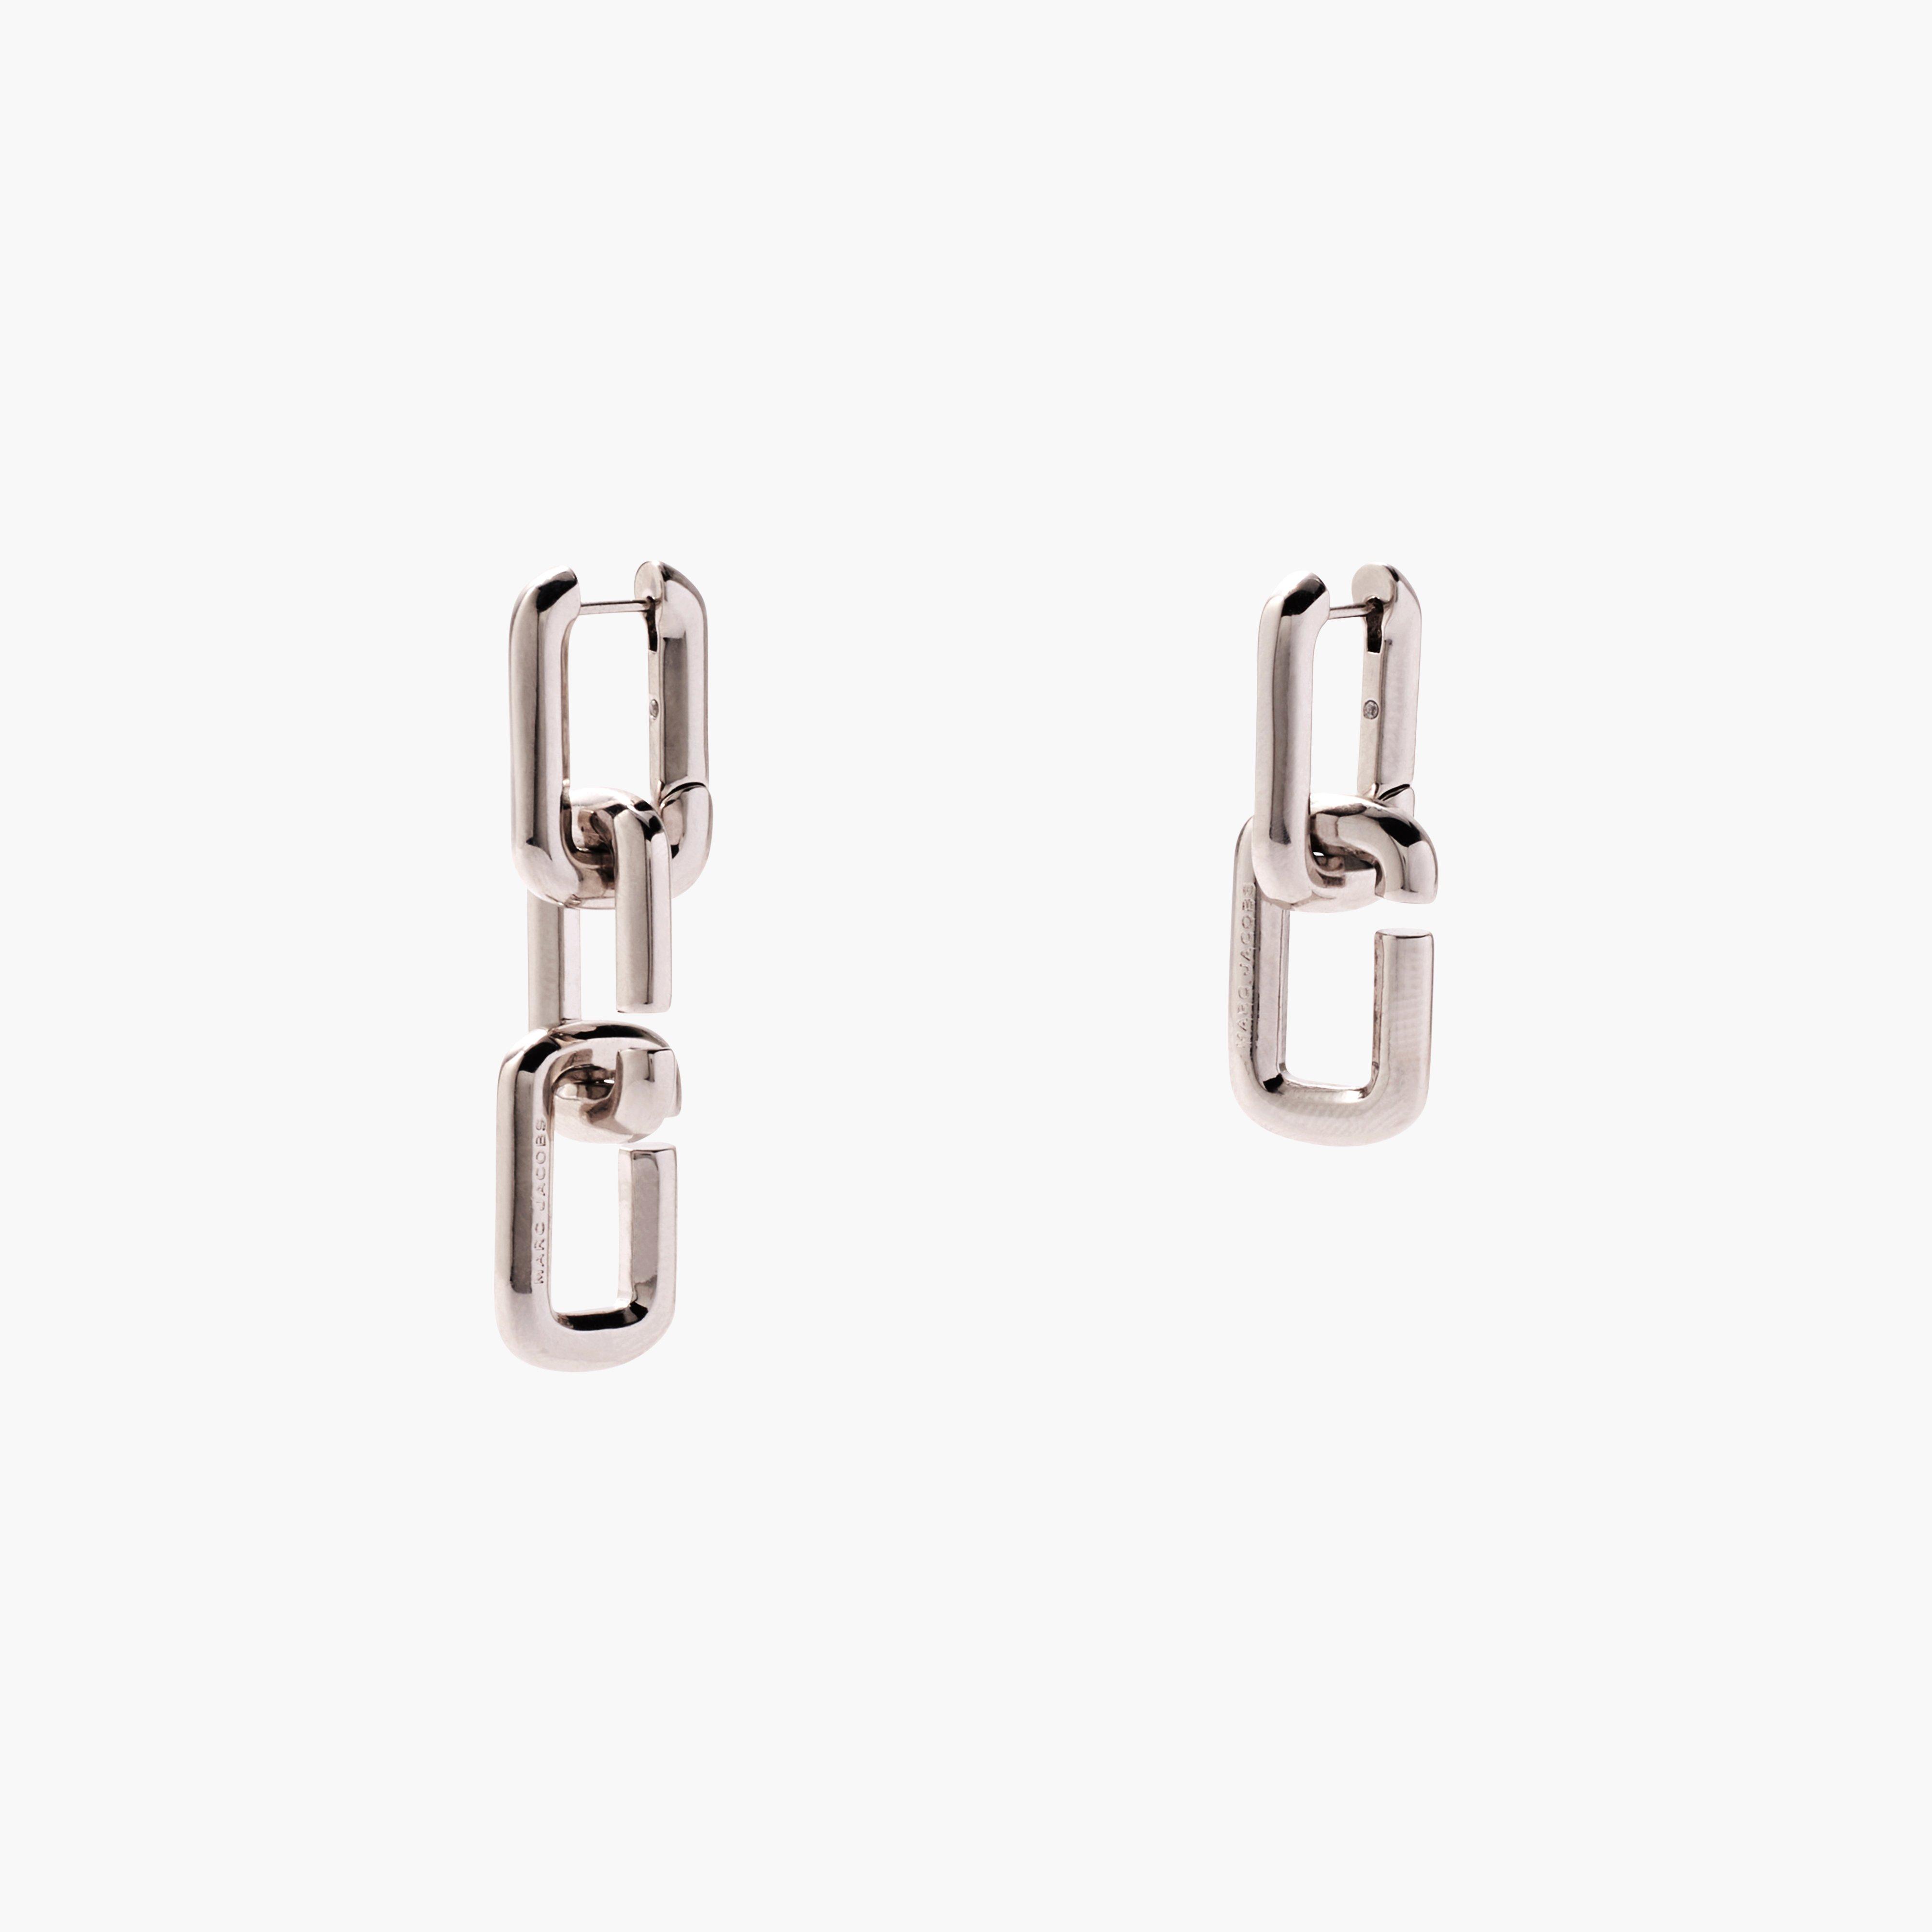 Marc by Marc jacobs The J Marc Chain Link Earrings,SILVER